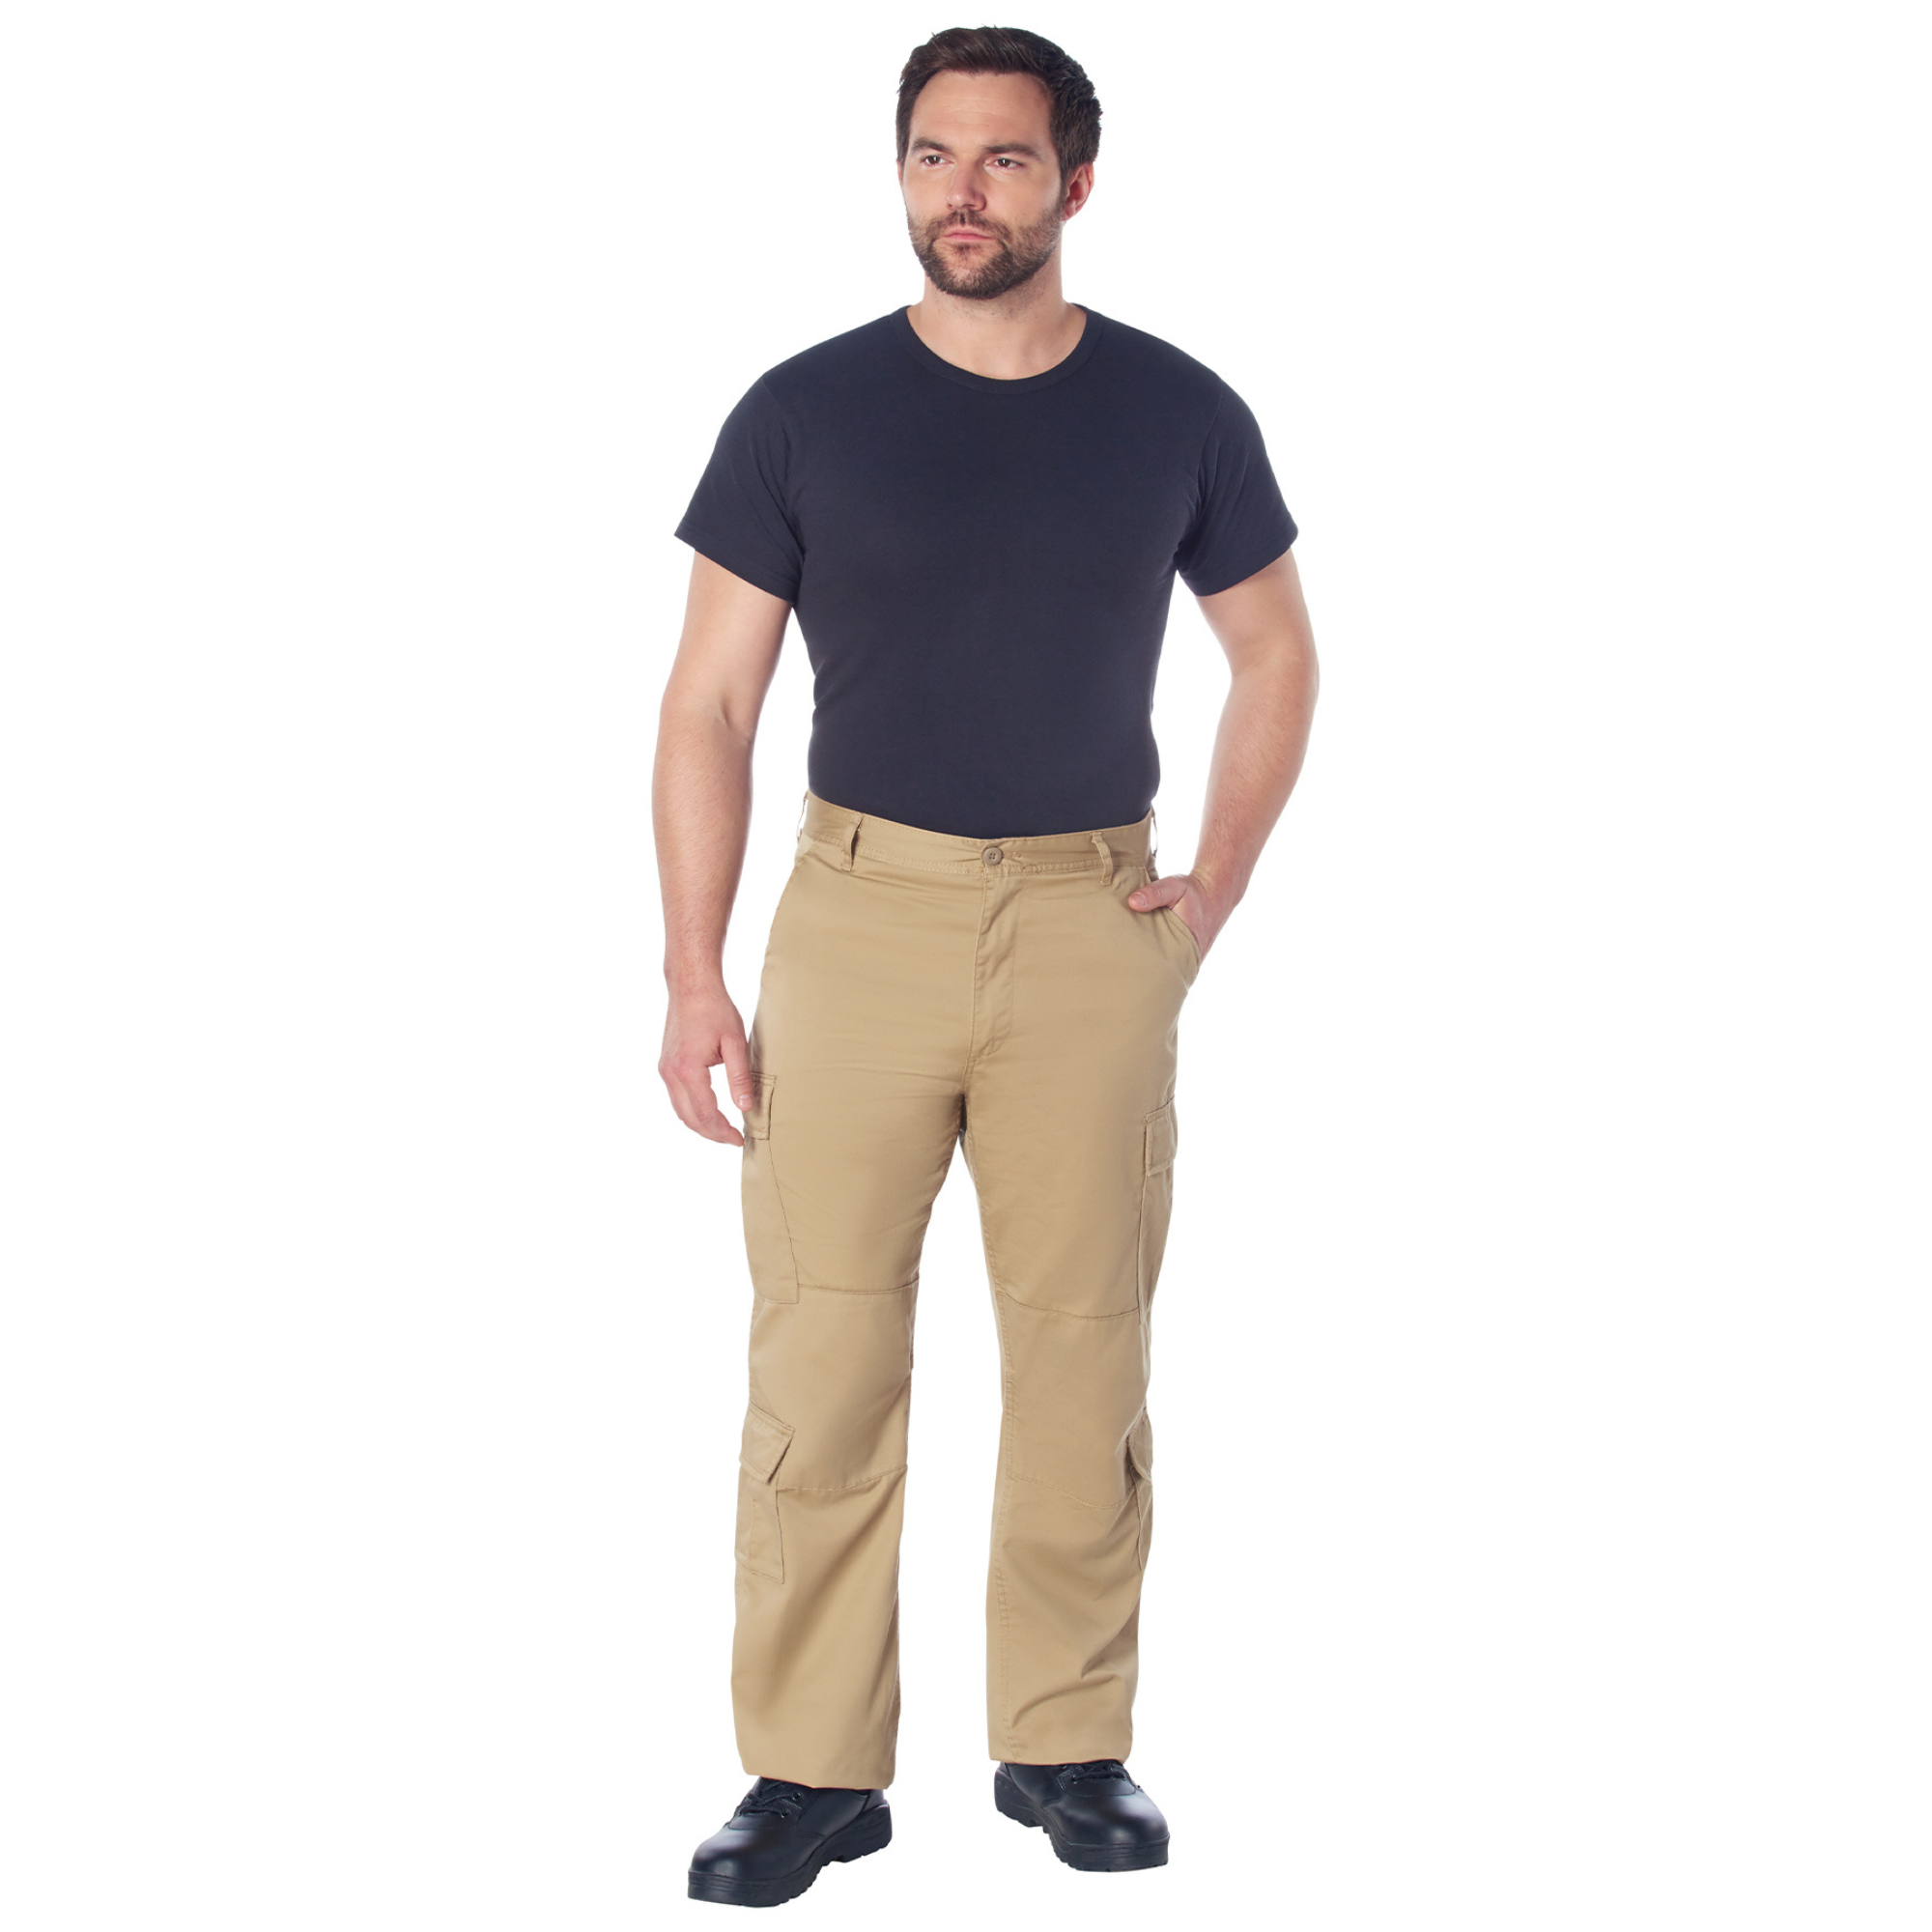 Rothco - Vintage Paratrooper Cargo Fatigue Pants - Subdued